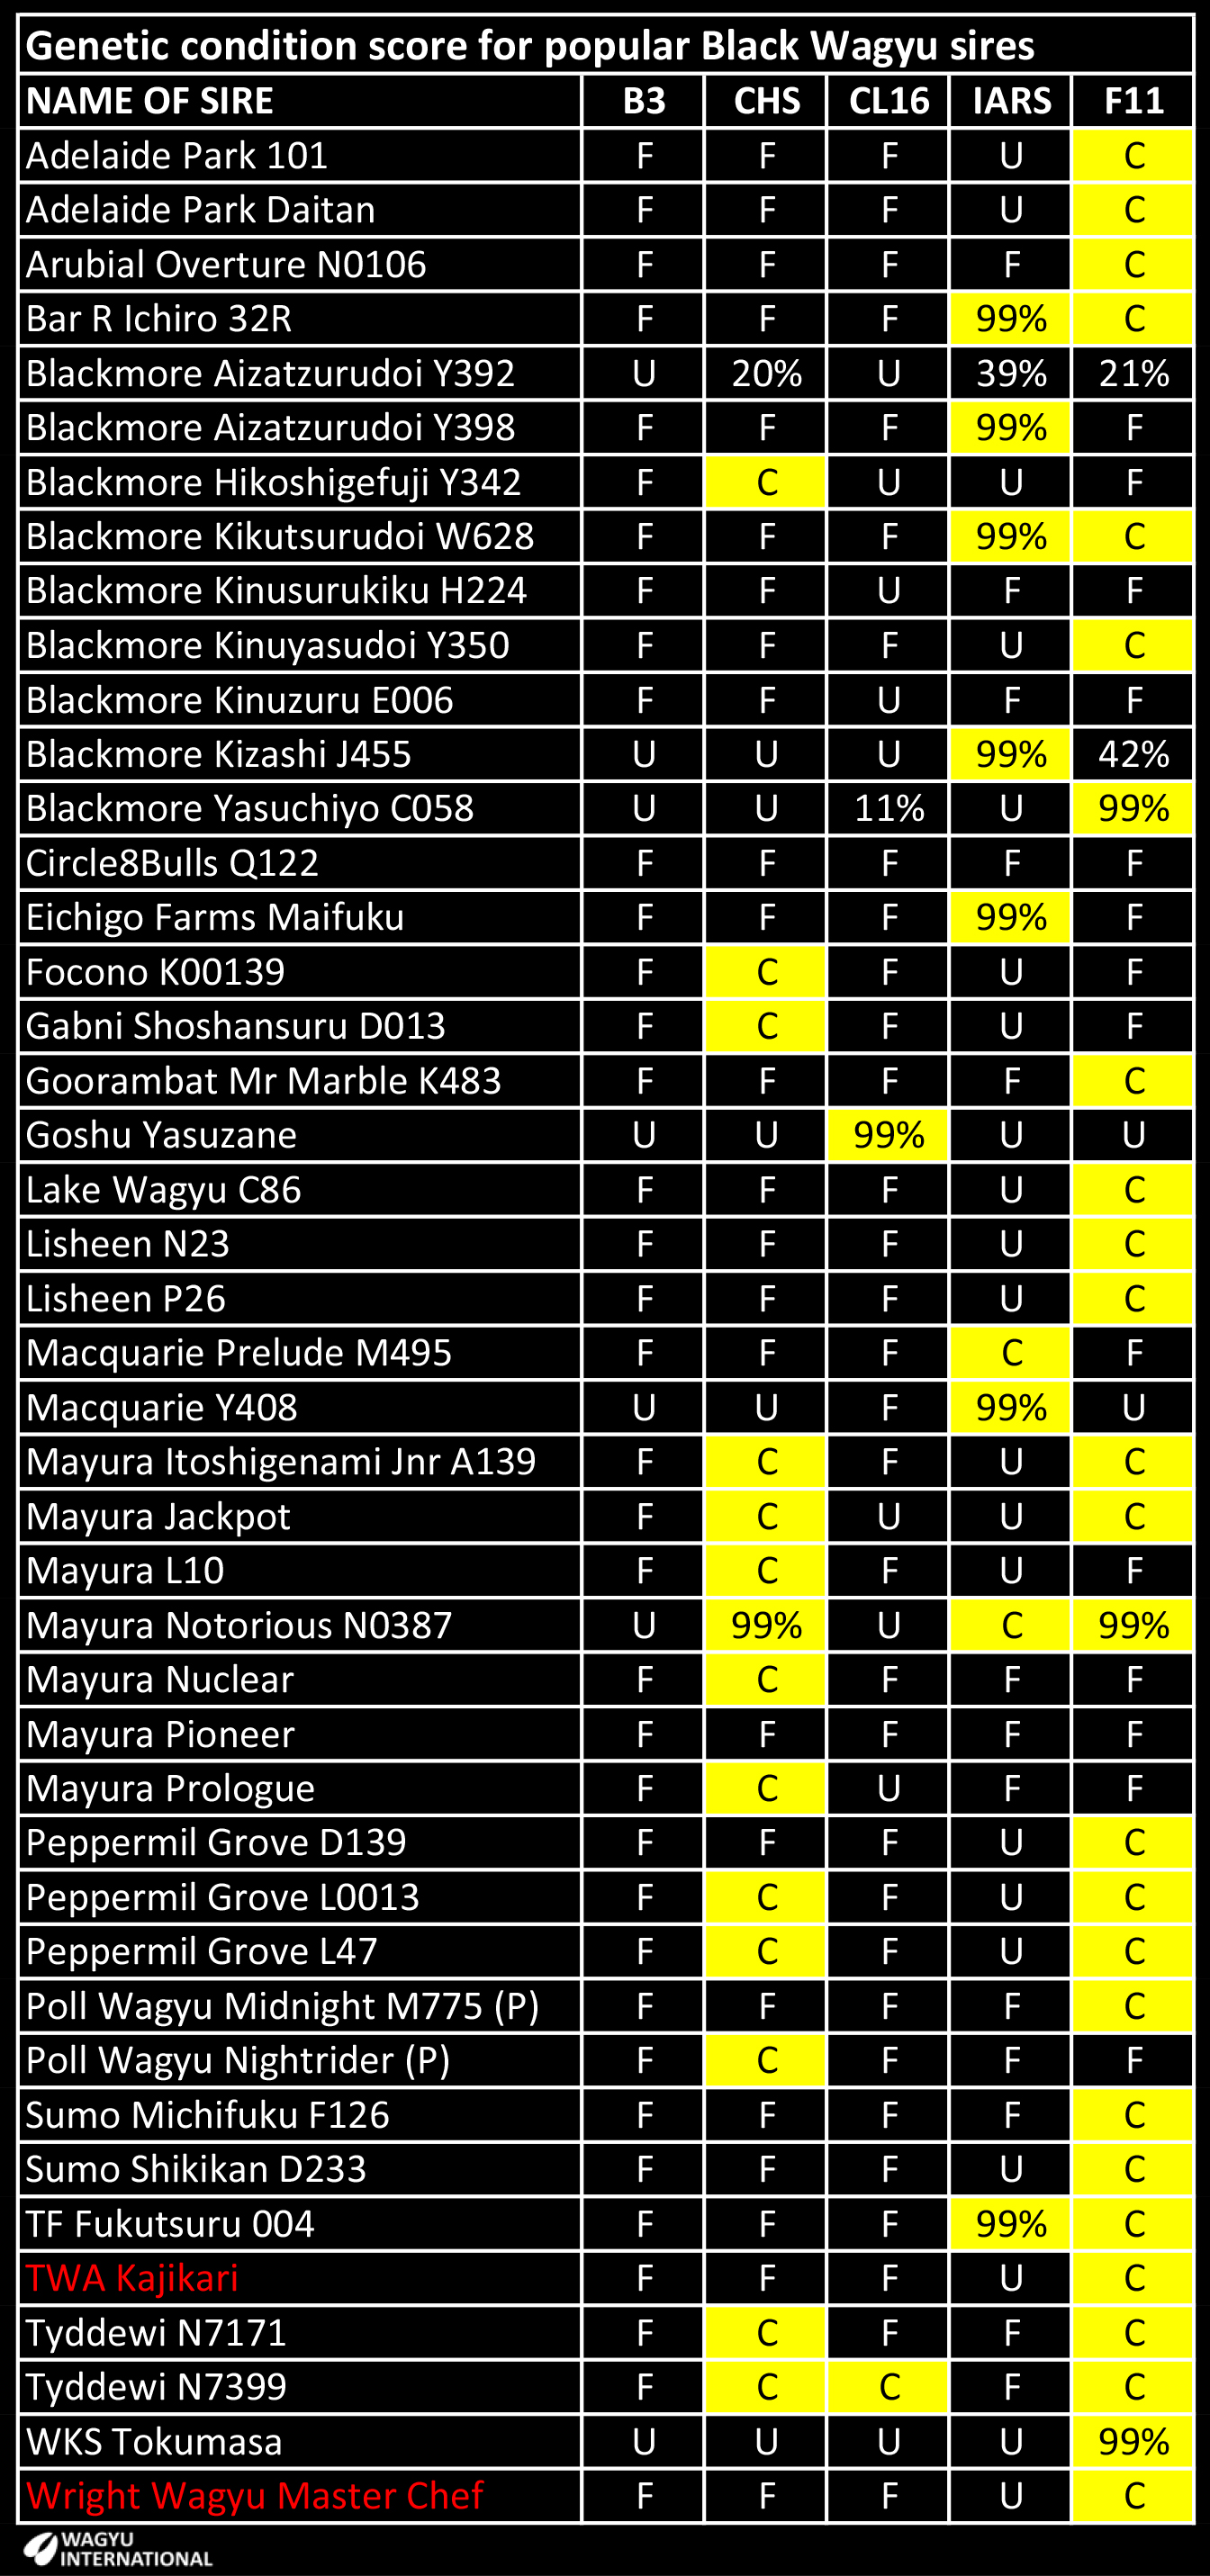 Table of recessive condition status of popular Black Wagyu sires or those that are advertised for export